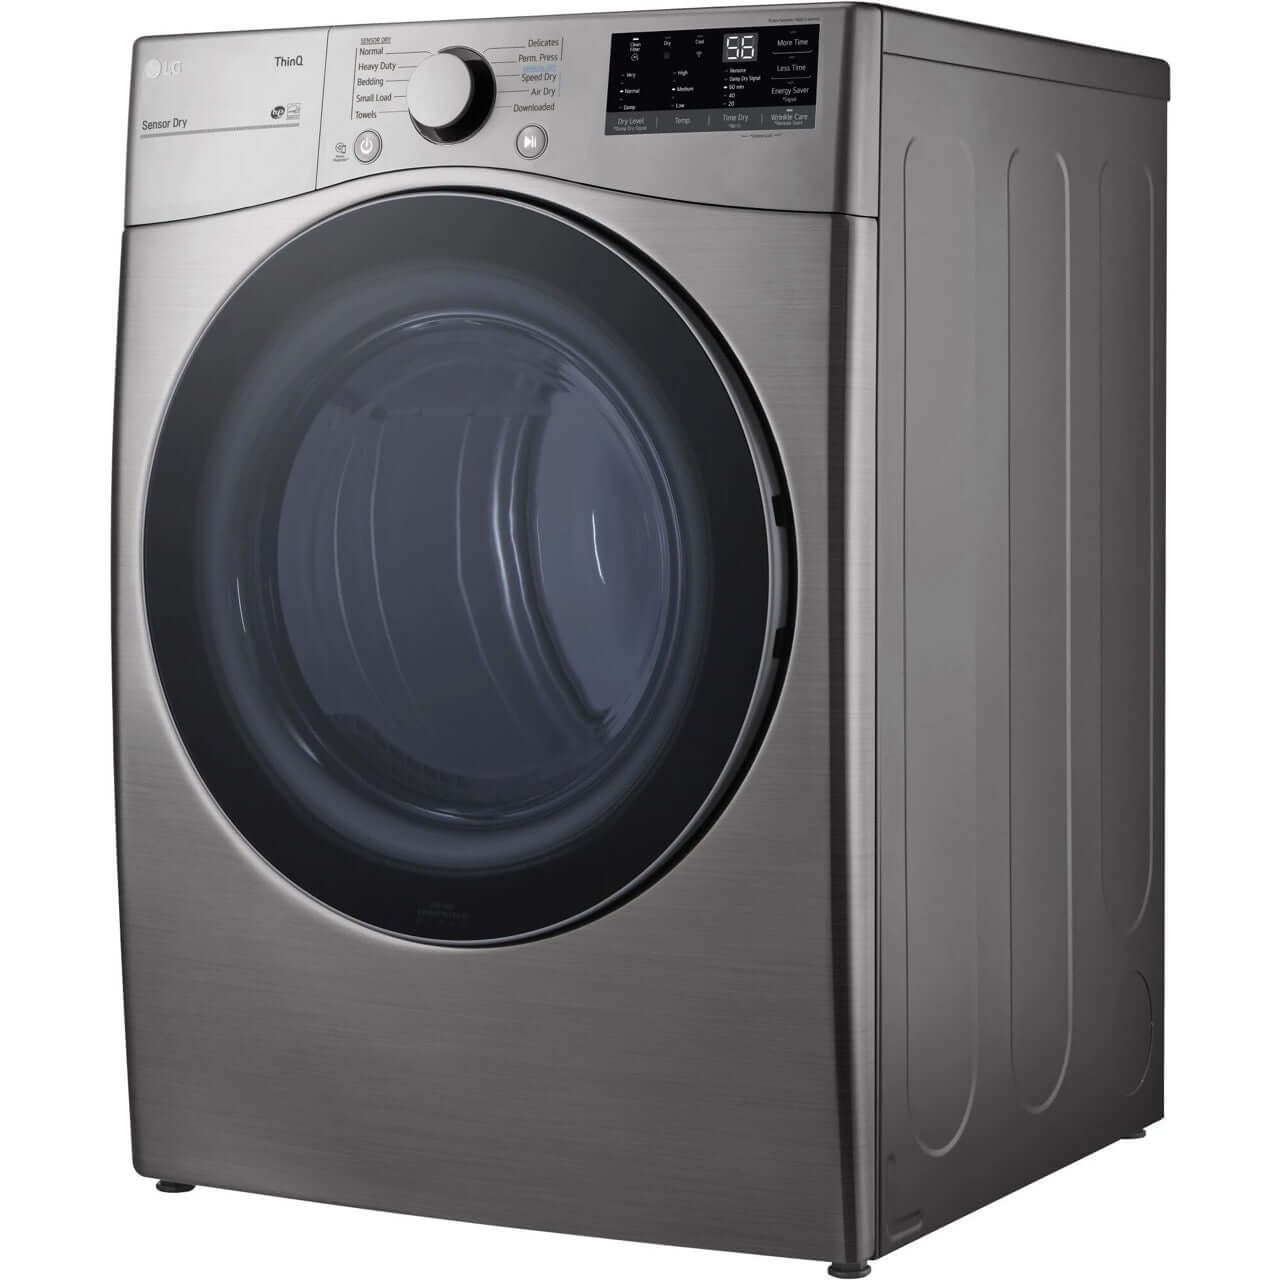 LG 27 In. 7.4-Cu. Ft. Front Load Electric Dryer with Built-In Intelligence in Graphite Steel (DLE3600V)